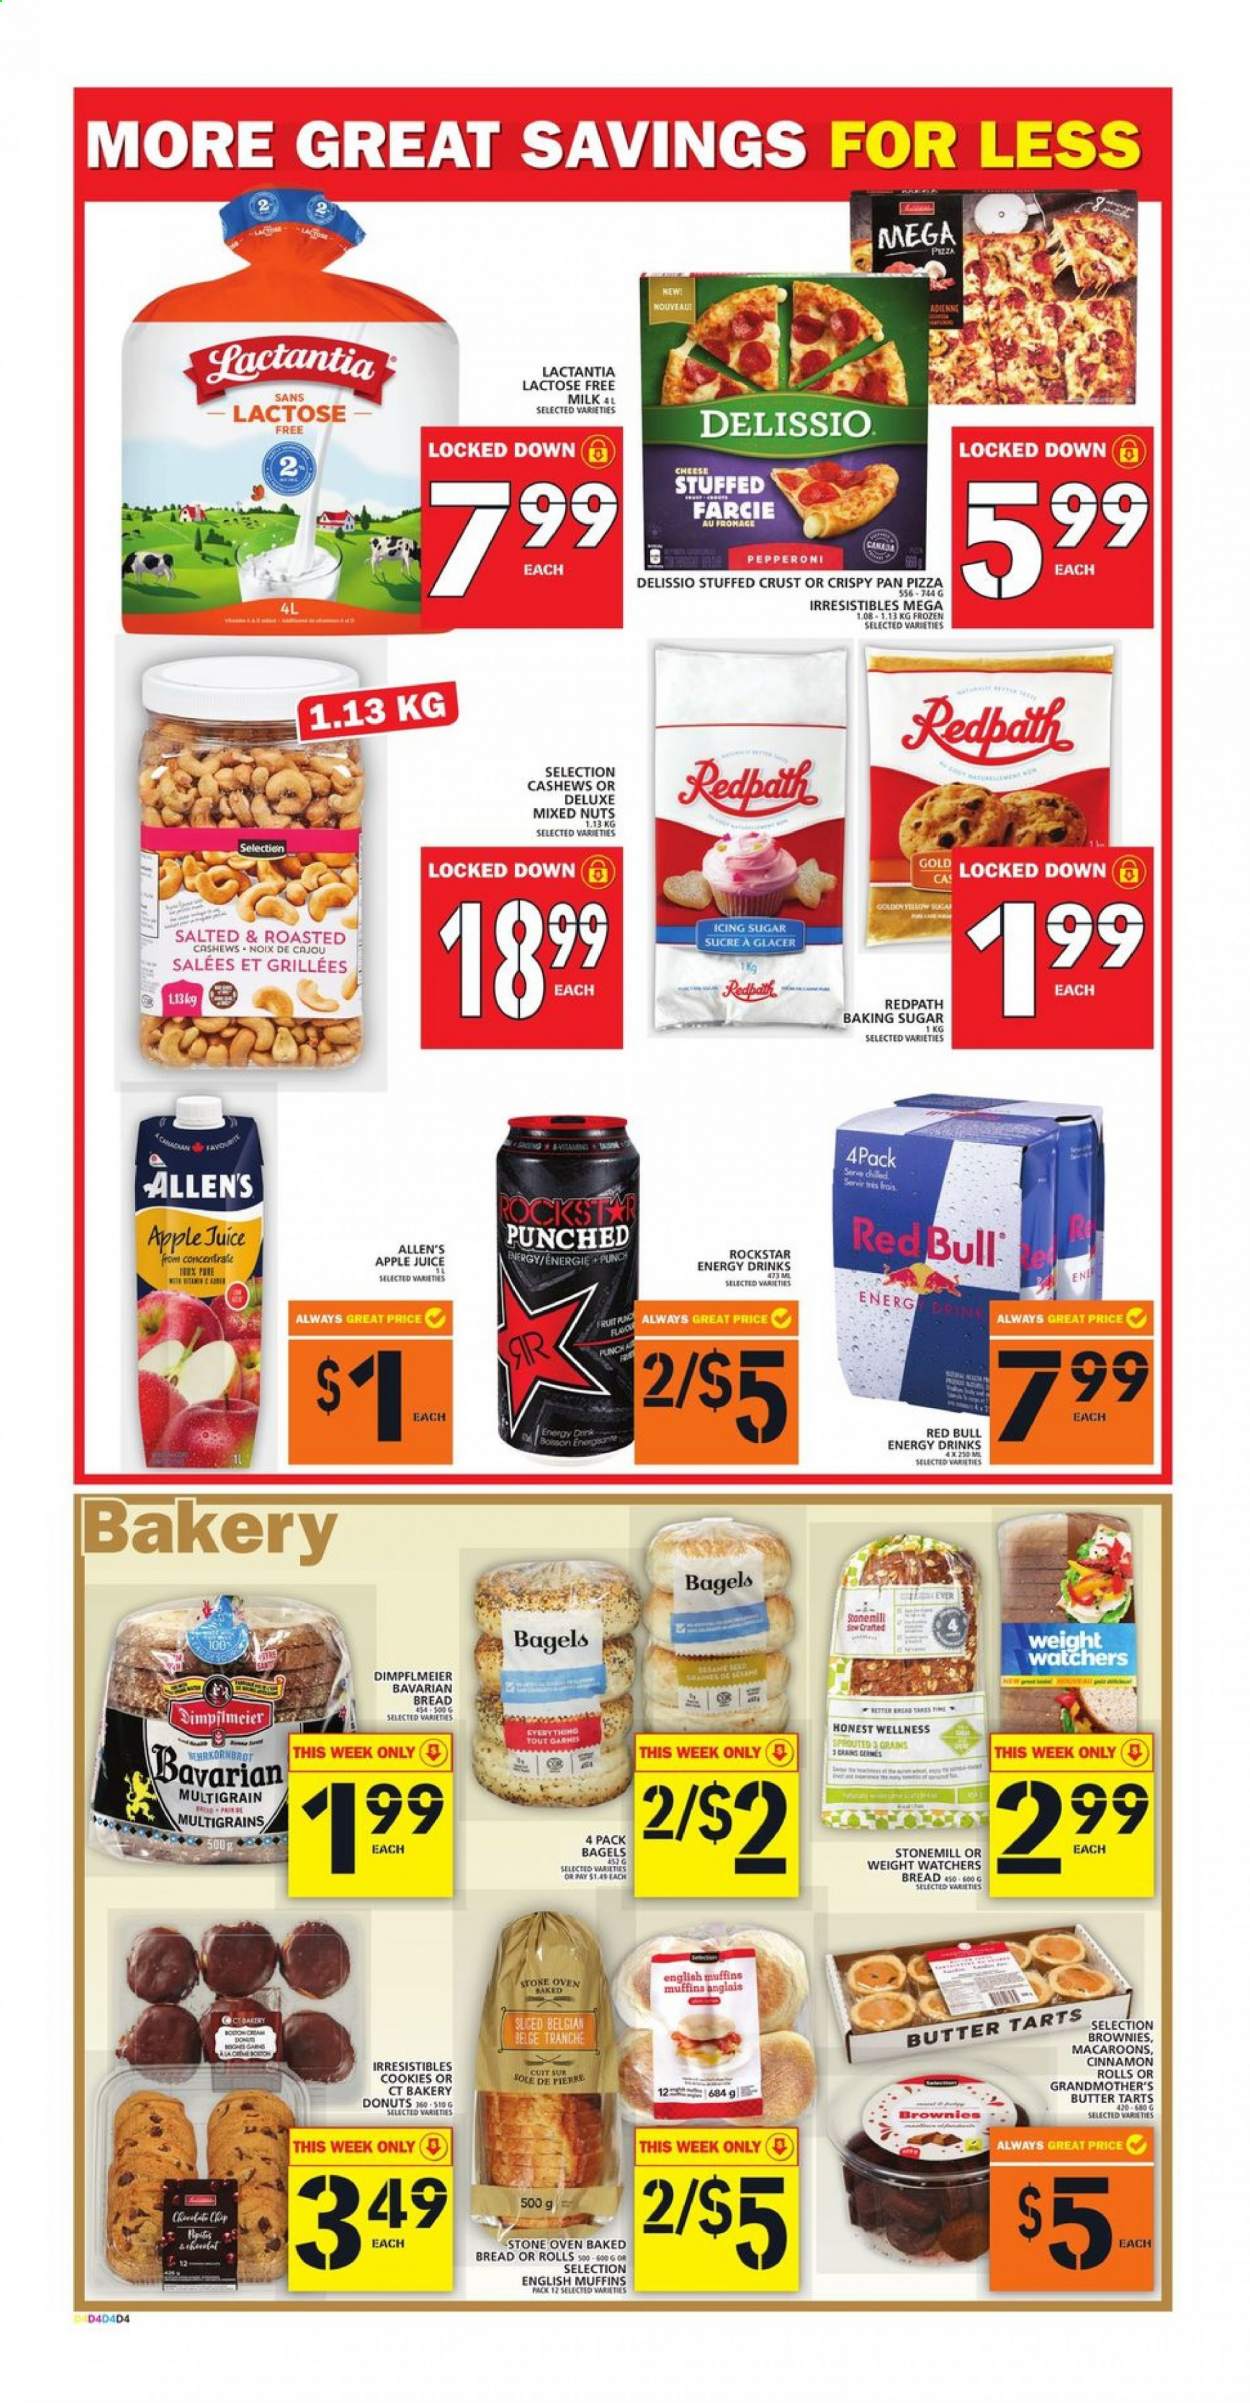 thumbnail - Circulaire Food Basics - 08 Avril 2021 - 14 Avril 2021 - Produits soldés - pizza, cookies, Always, sucre. Page 5.